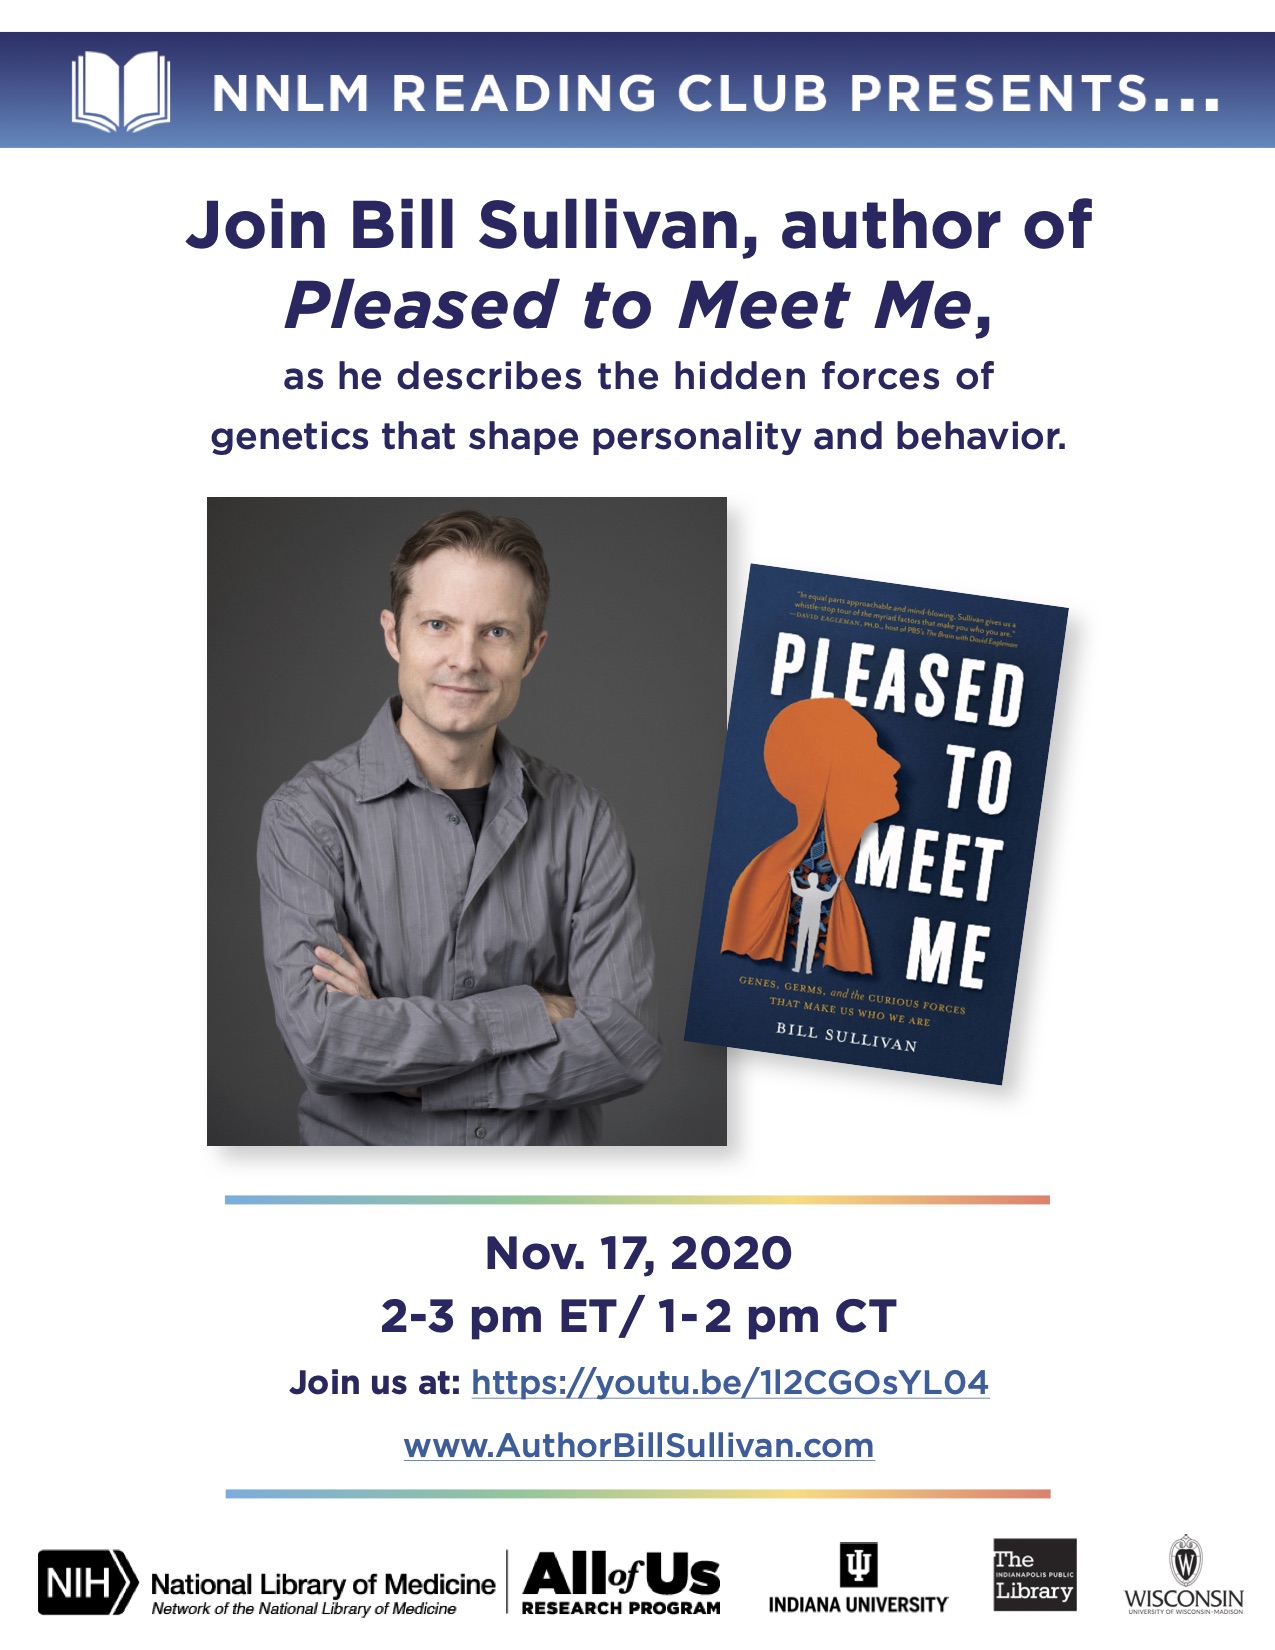 Join Us for a book talk with Bill Sullivan author of Pleased to Meet Me